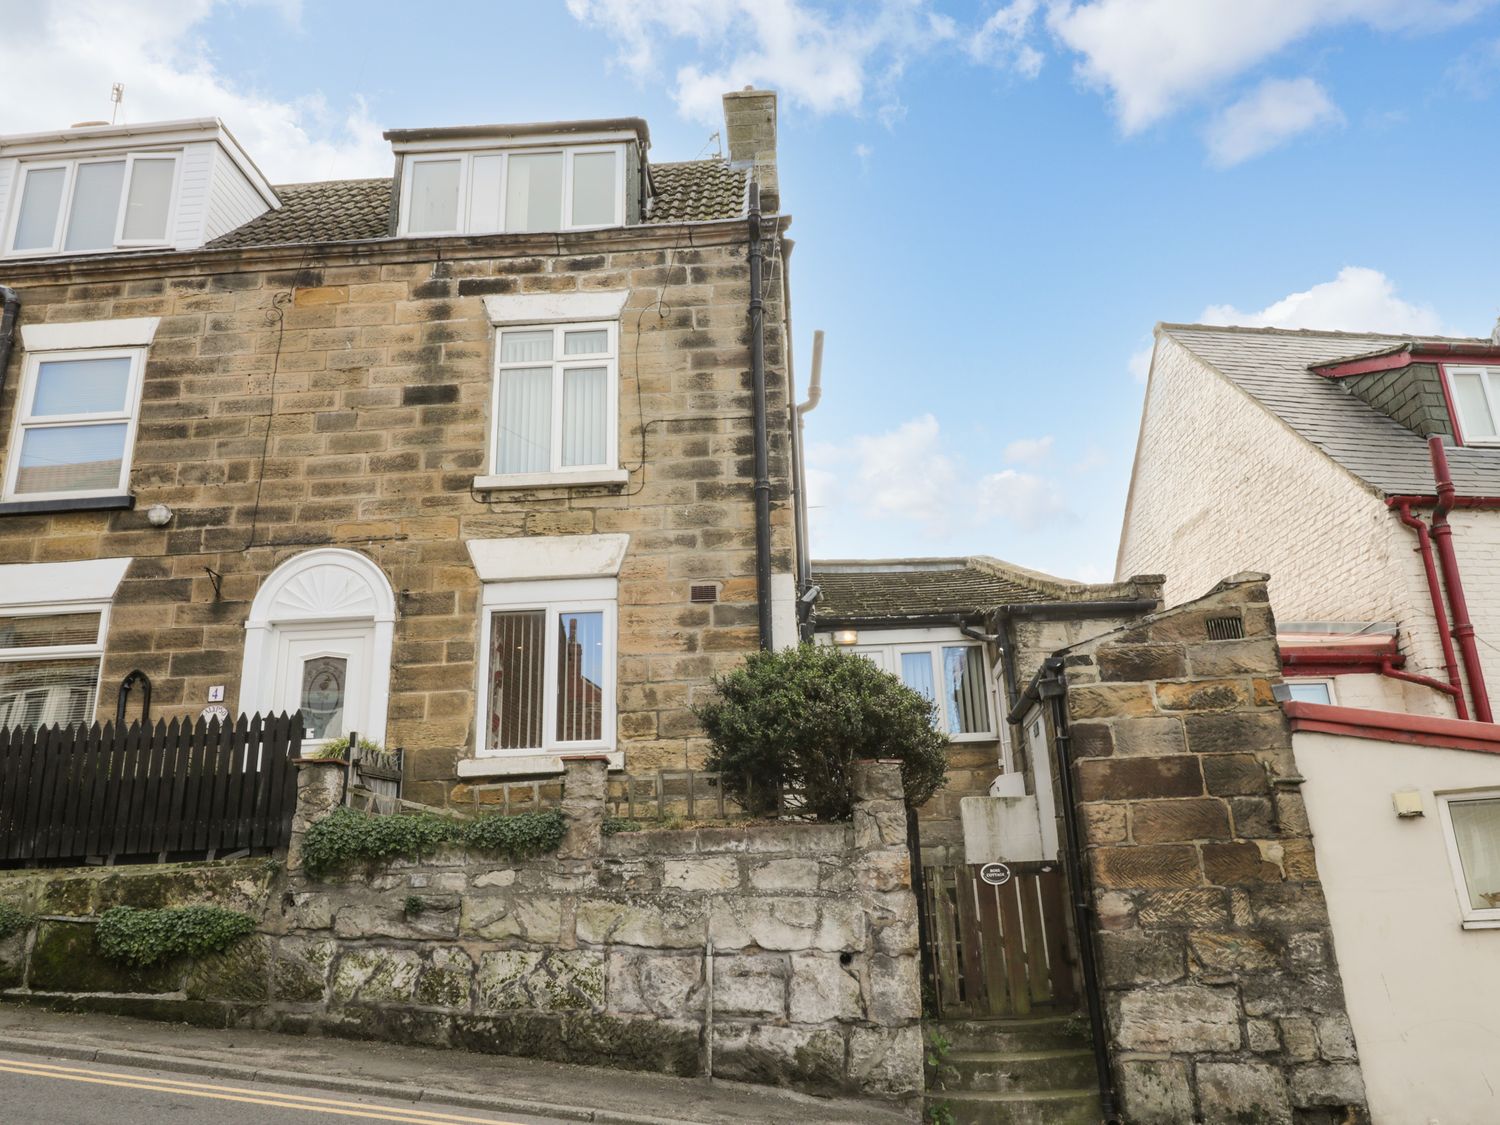 5 Green Lane - North Yorkshire (incl. Whitby) - 1084454 - photo 1